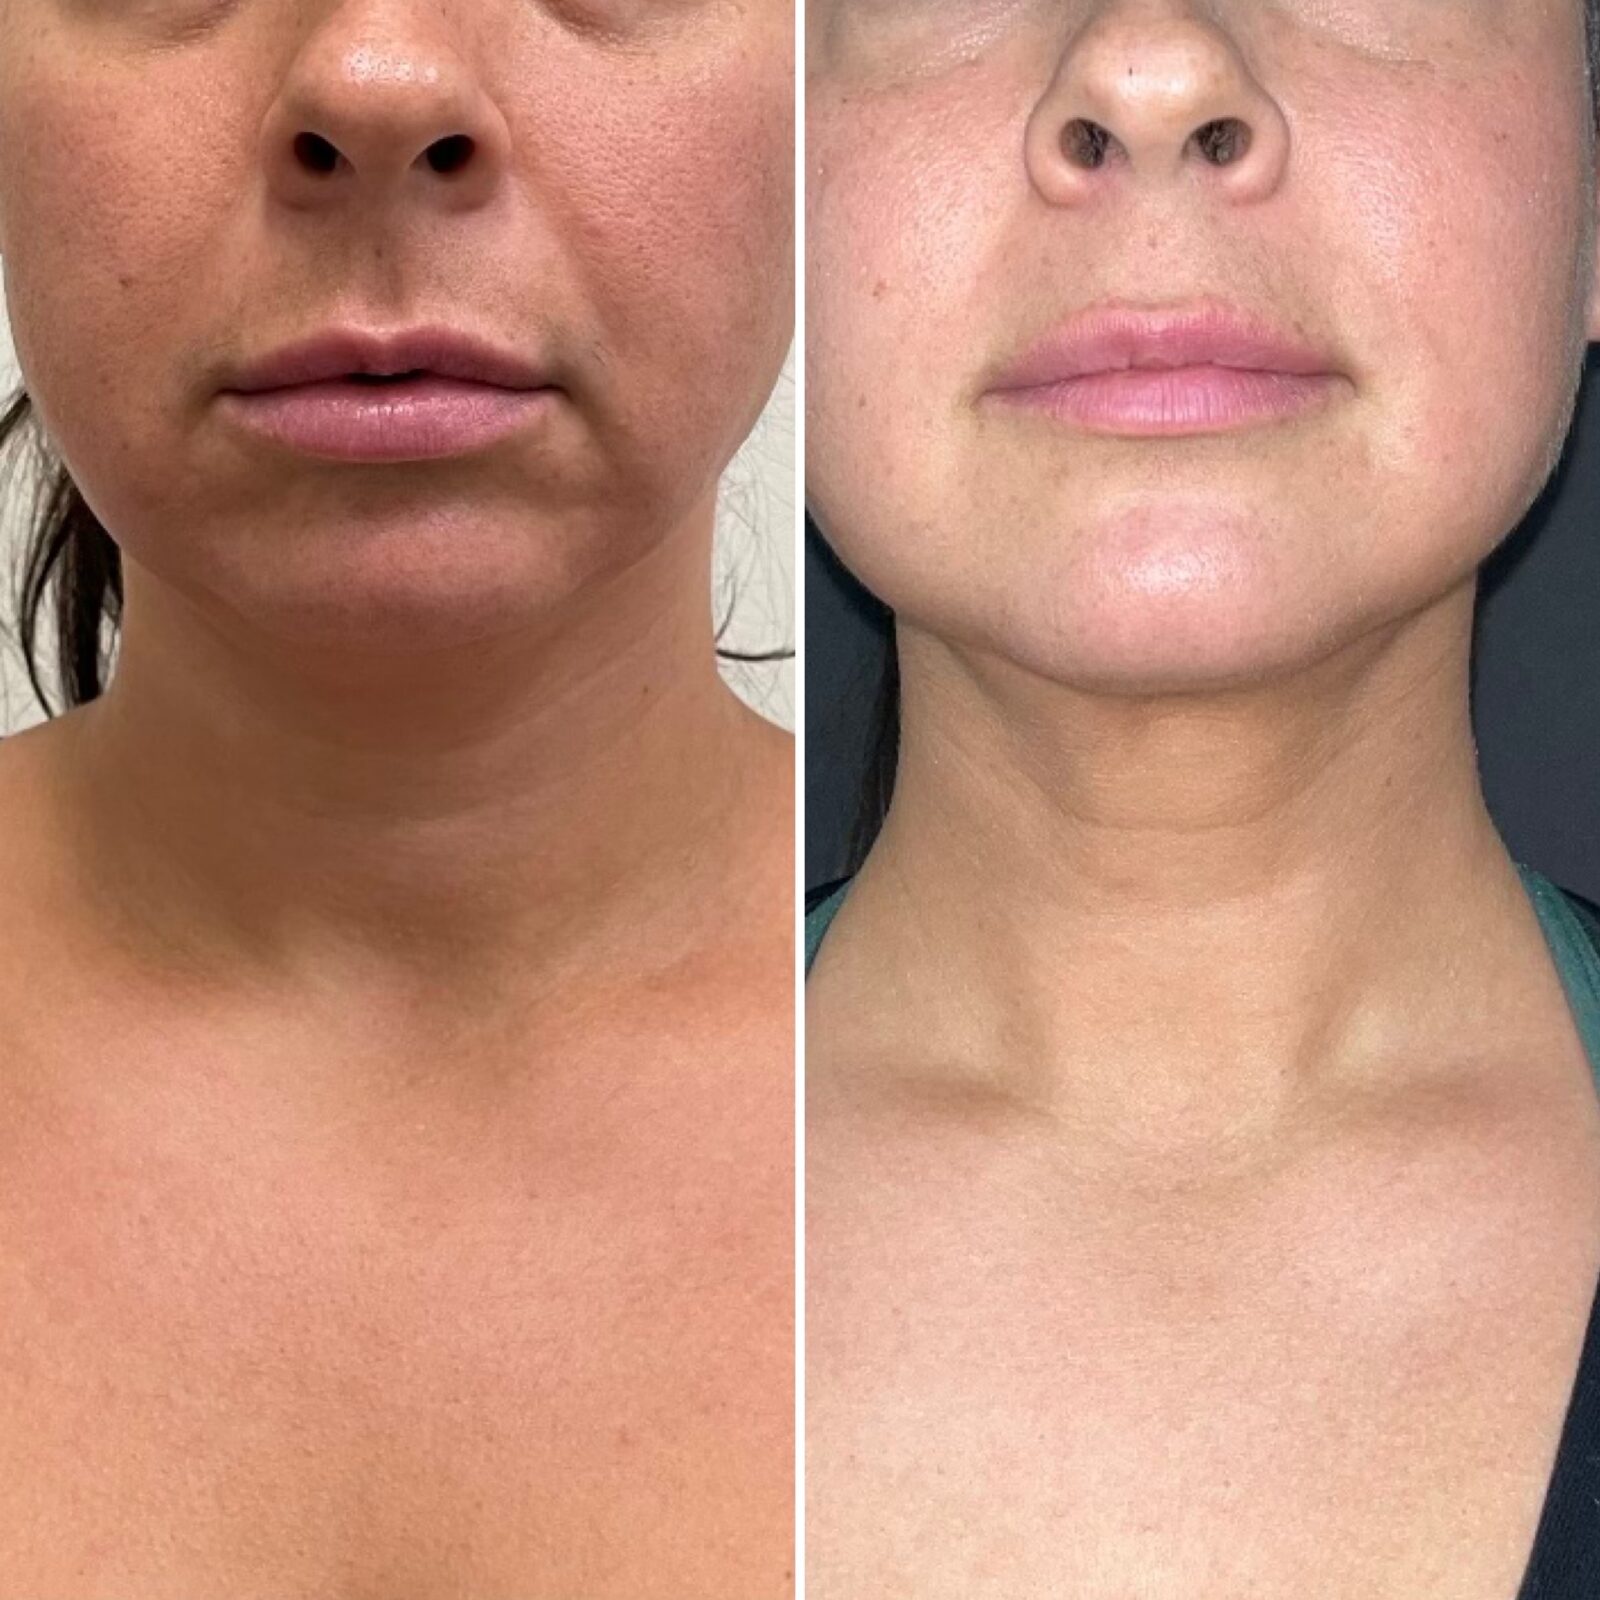 before and after 1 month of facetite front view